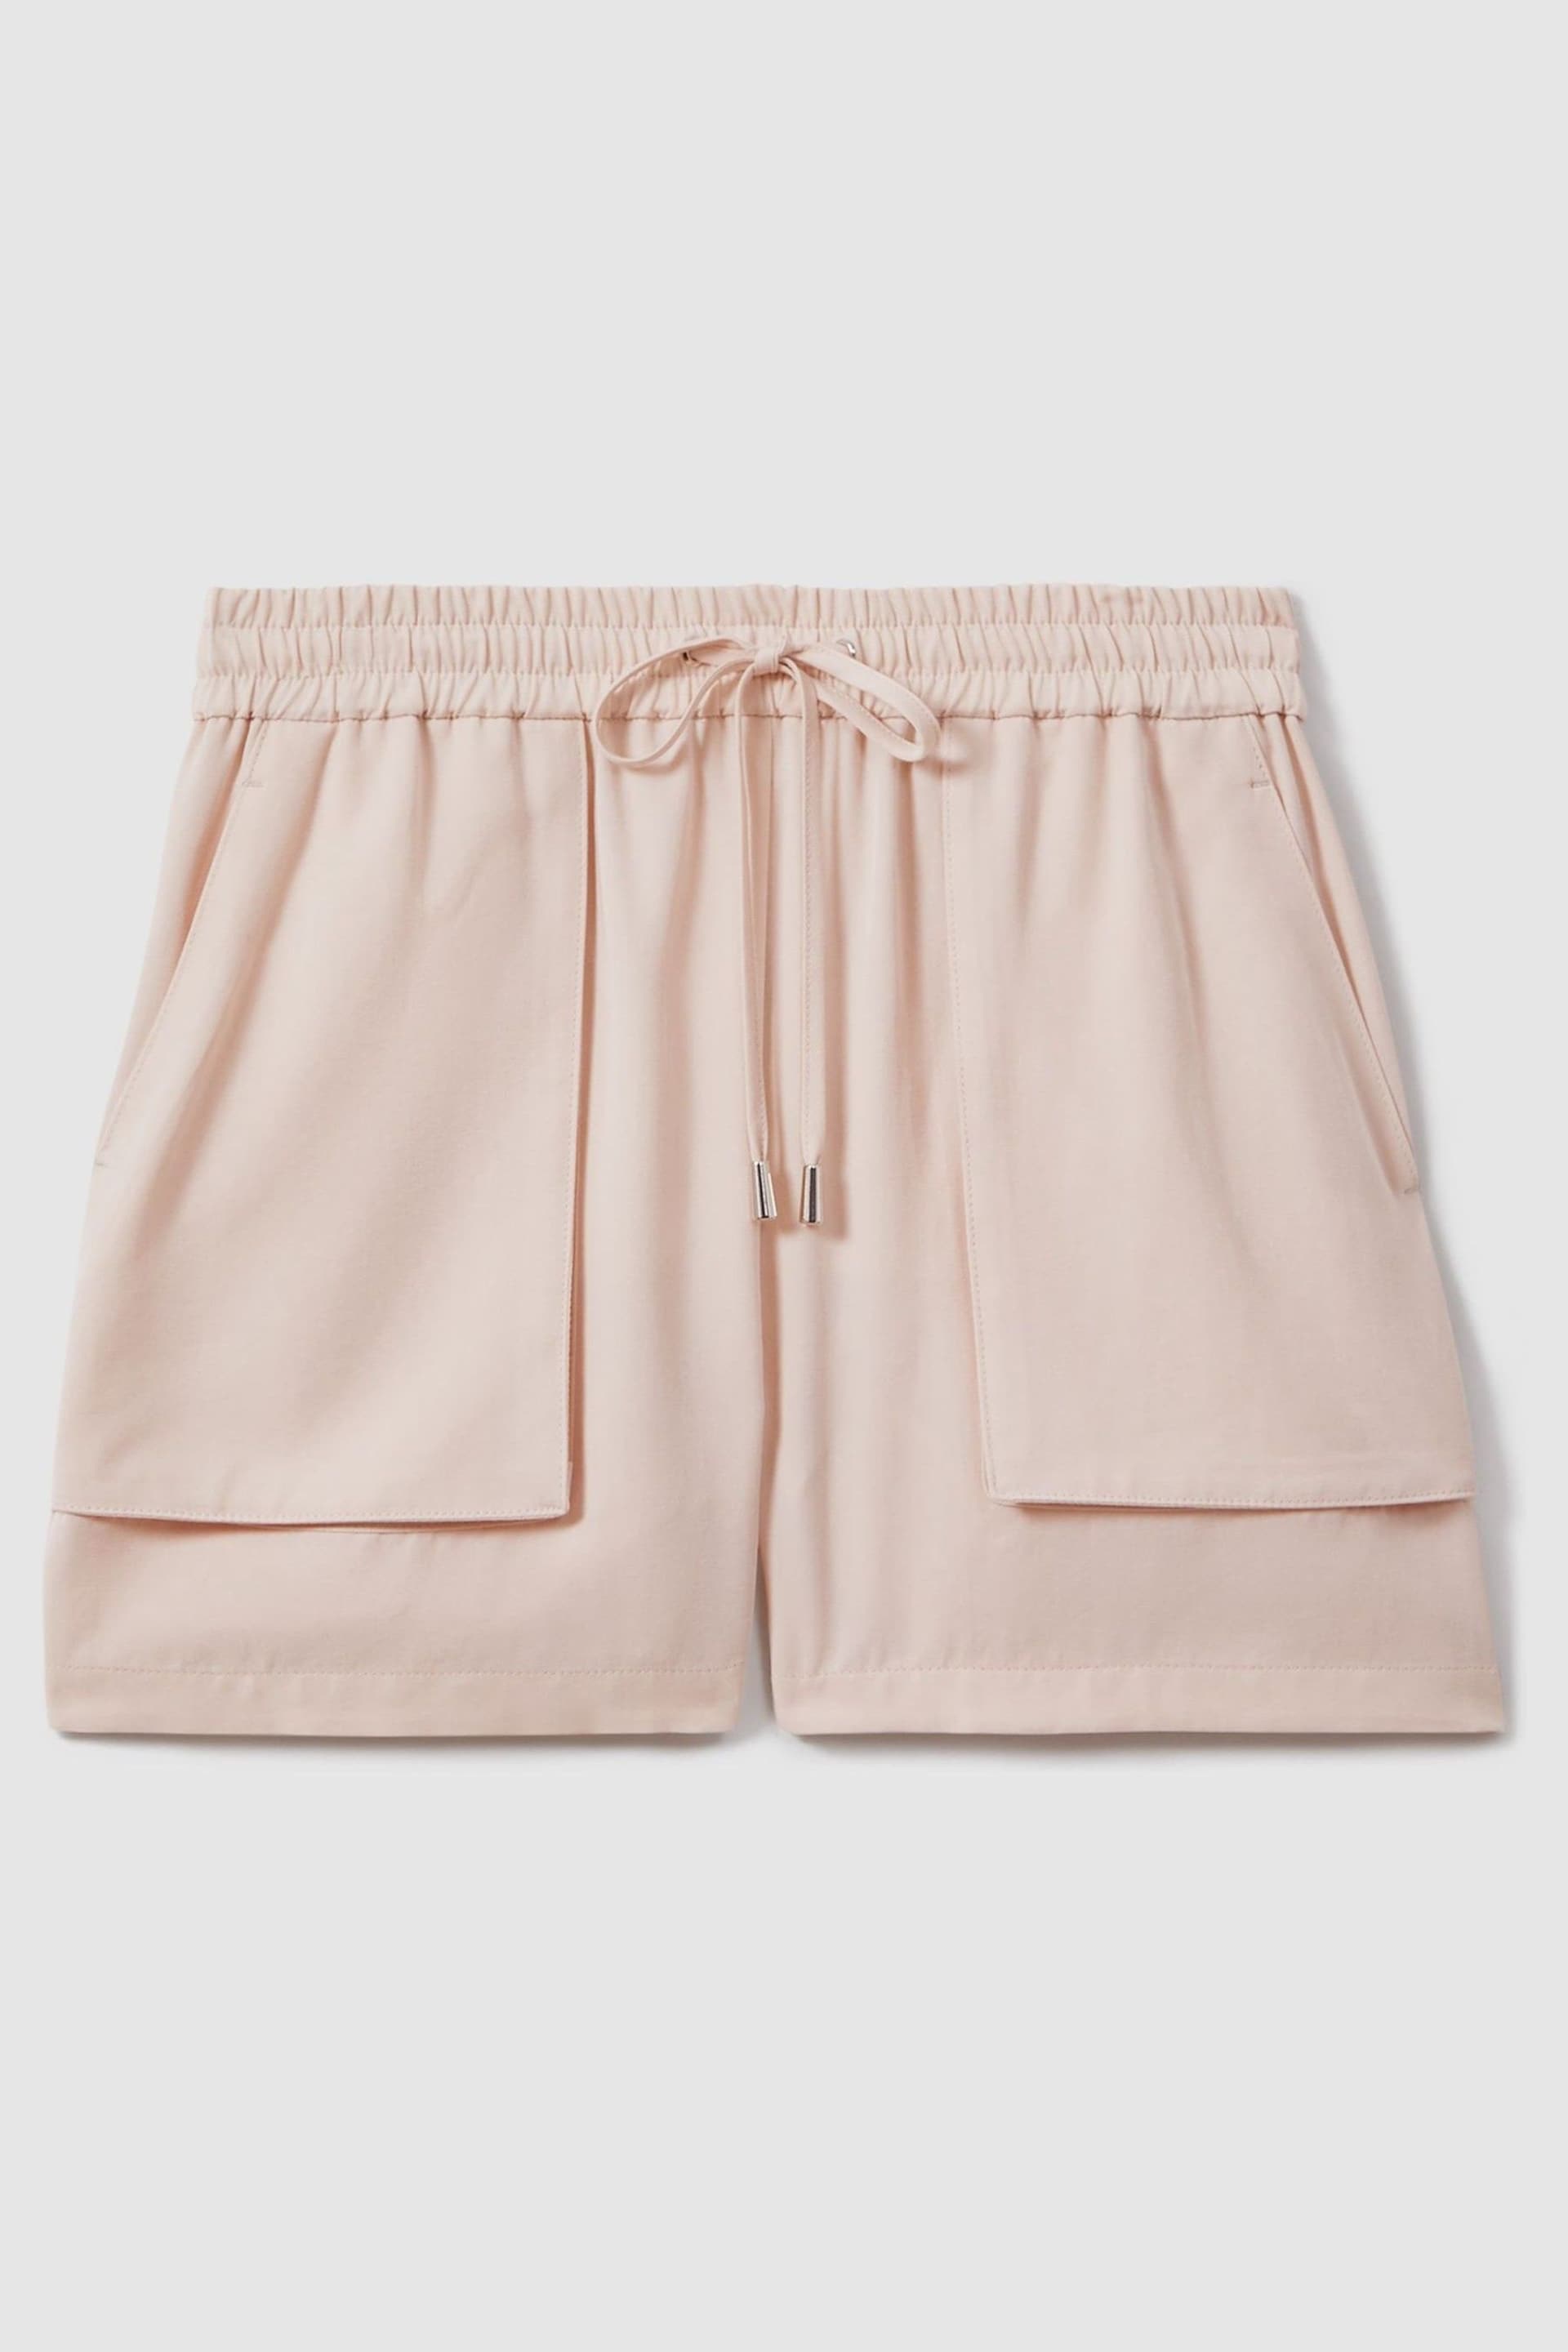 Reiss Pink Isador Drawstring Shorts with TENCEL™ Fibers - Image 2 of 5